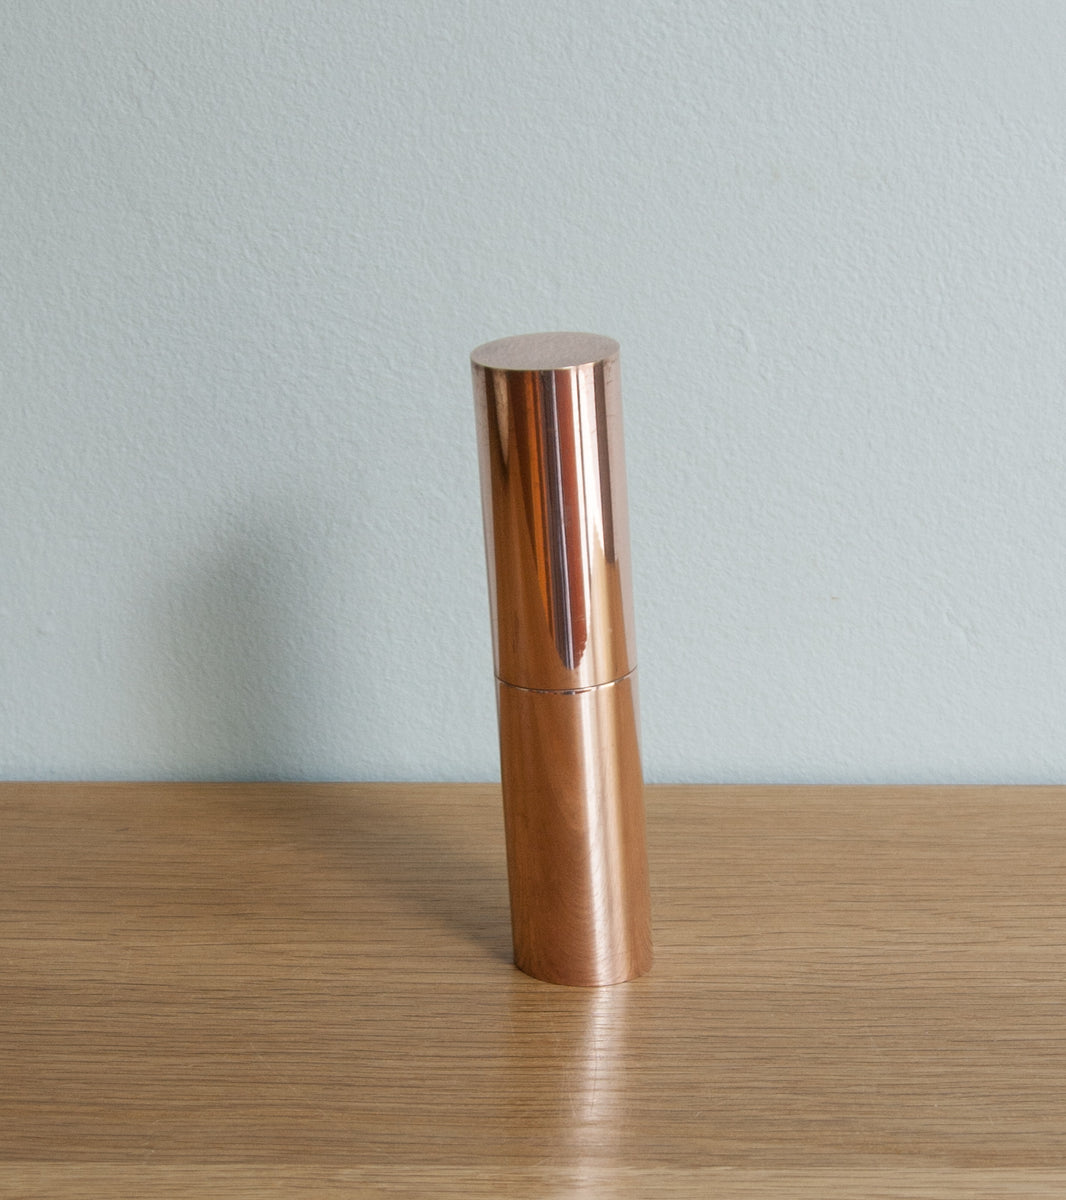 Shiny Solid Cast Italic Mill - Copper Plated Michael Anastassiades & Carl Auböck